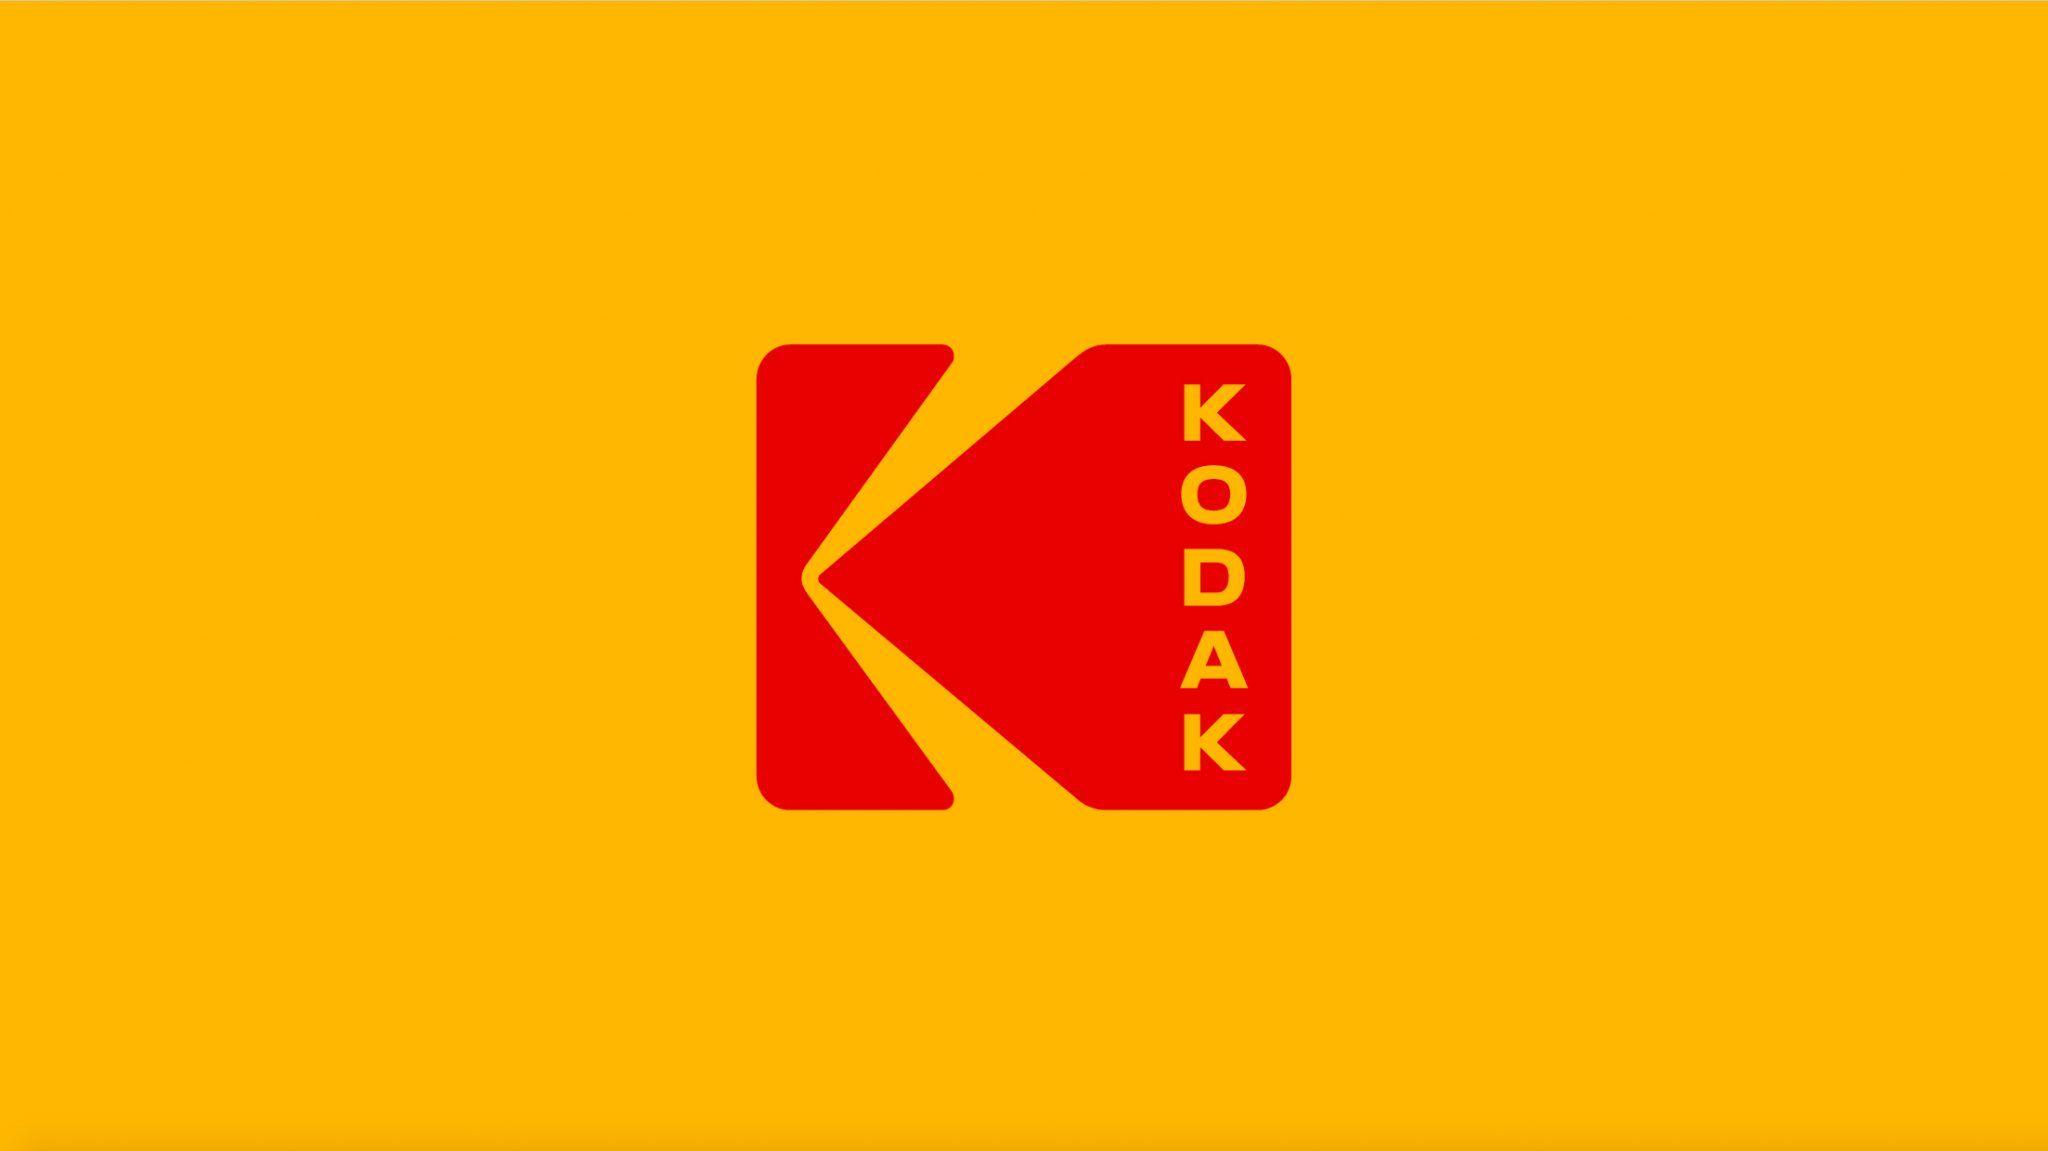 Text On Yellow Red Logo - Kodak brings back their classic logo (with a twist) - Hotfoot Design